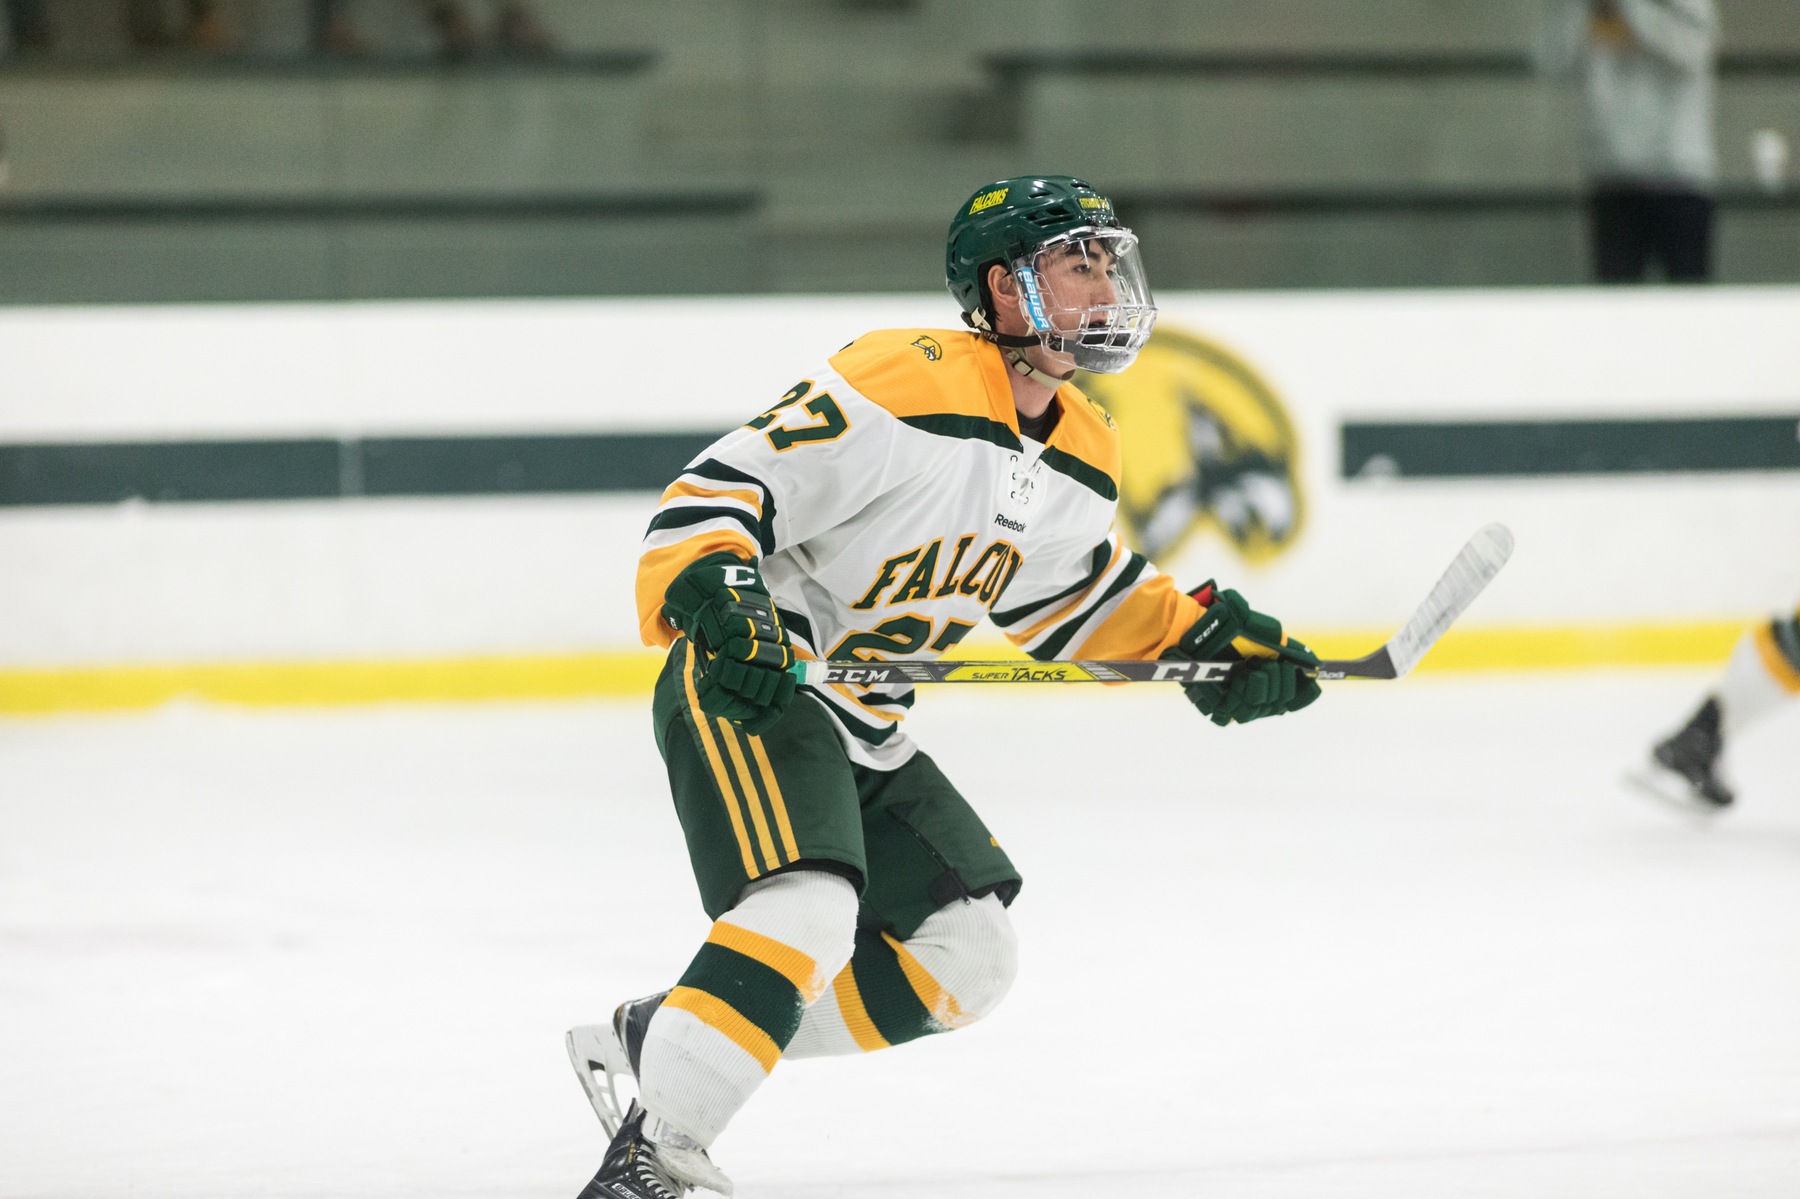  Falcons Skate to Tie with Worcester State, 4-4